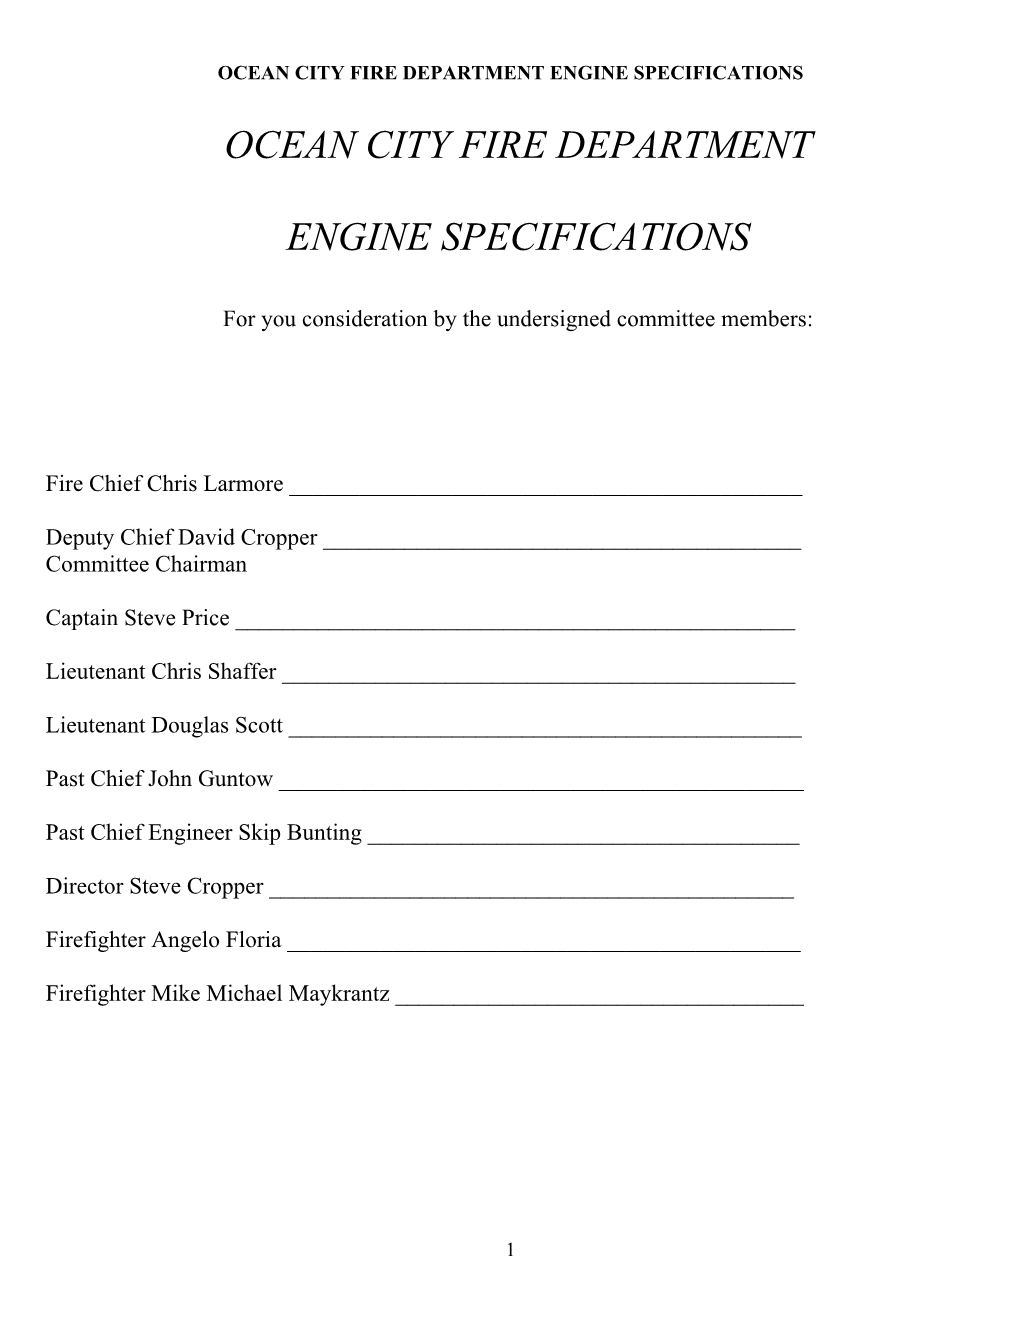 Ocean City Fire Department Engine Specifications